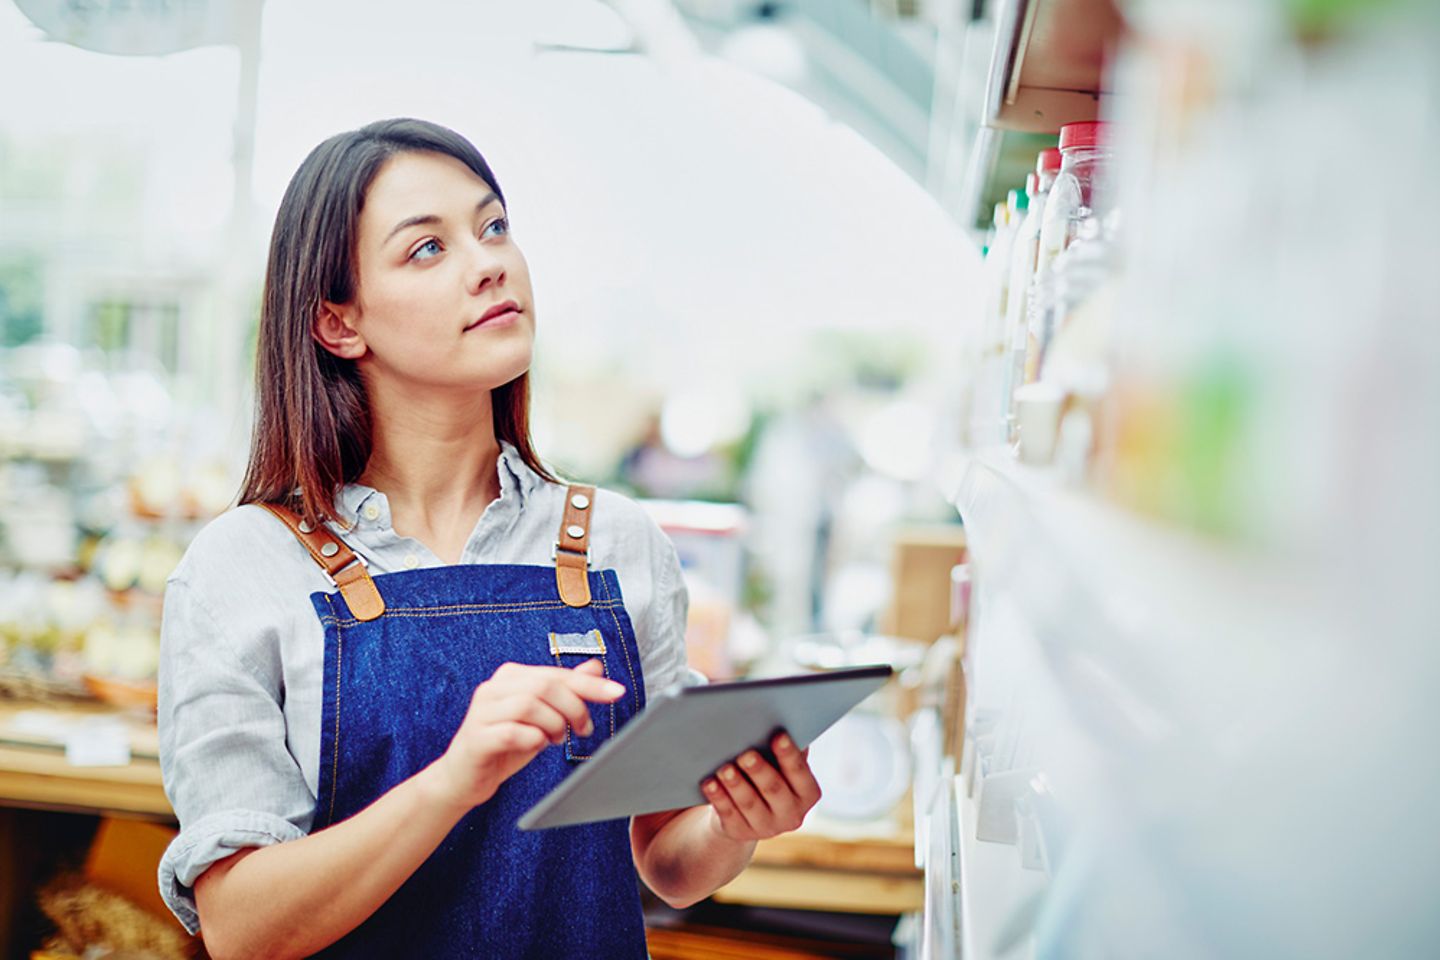 Shop assistant stands in front of supermarket shelf and taps on tablet